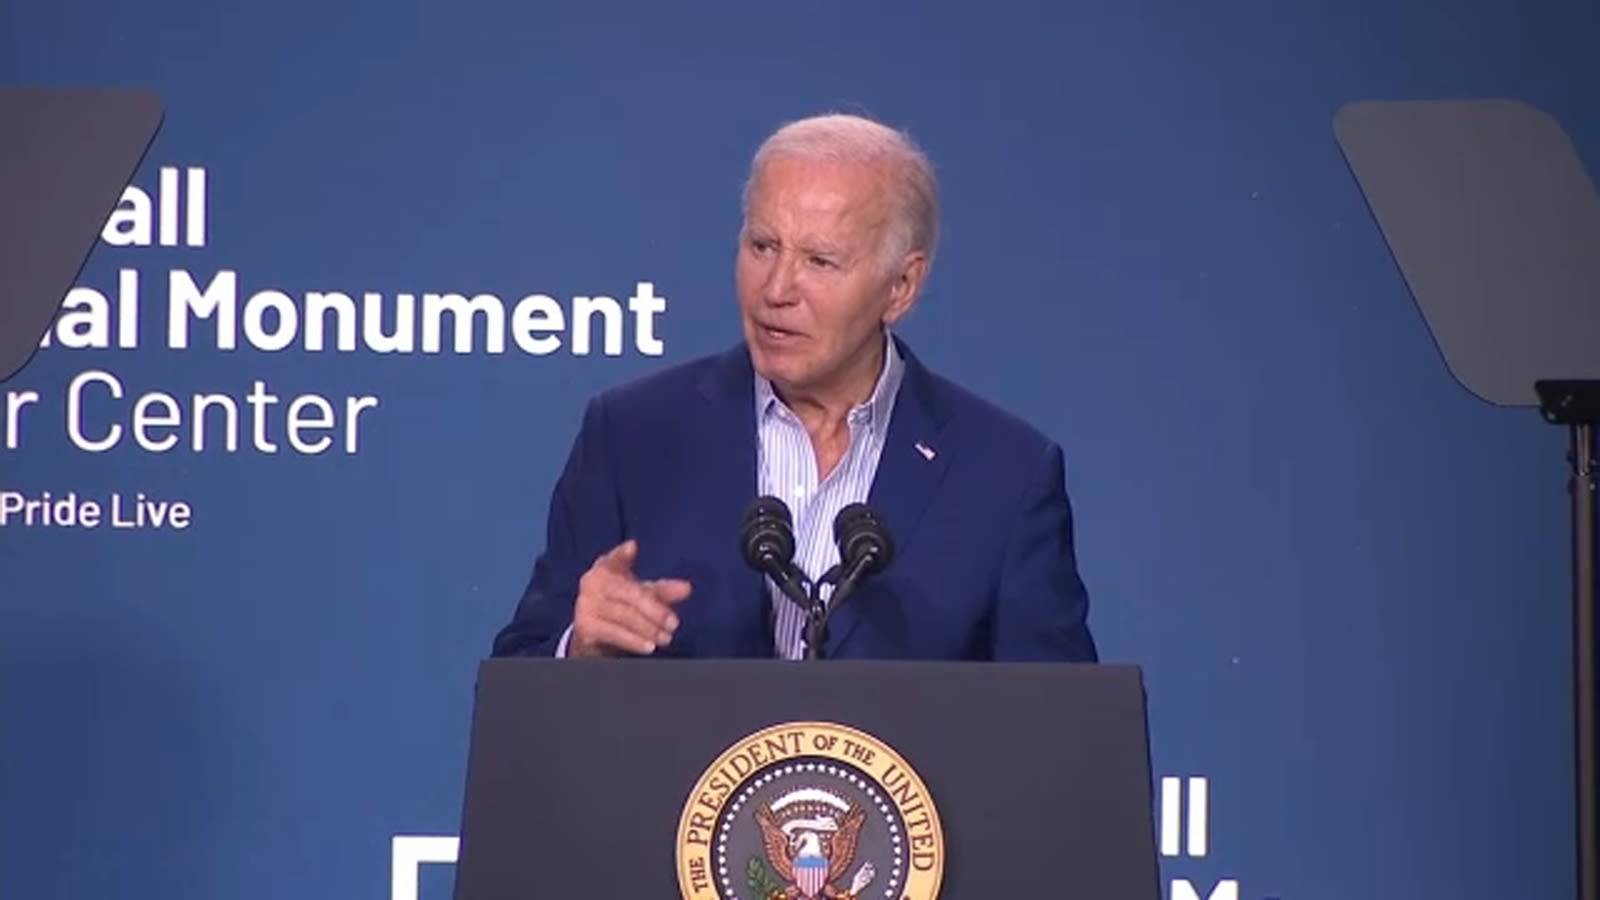 President Biden visits Stonewall National Monument Visitor Center ahead of Pride weekend